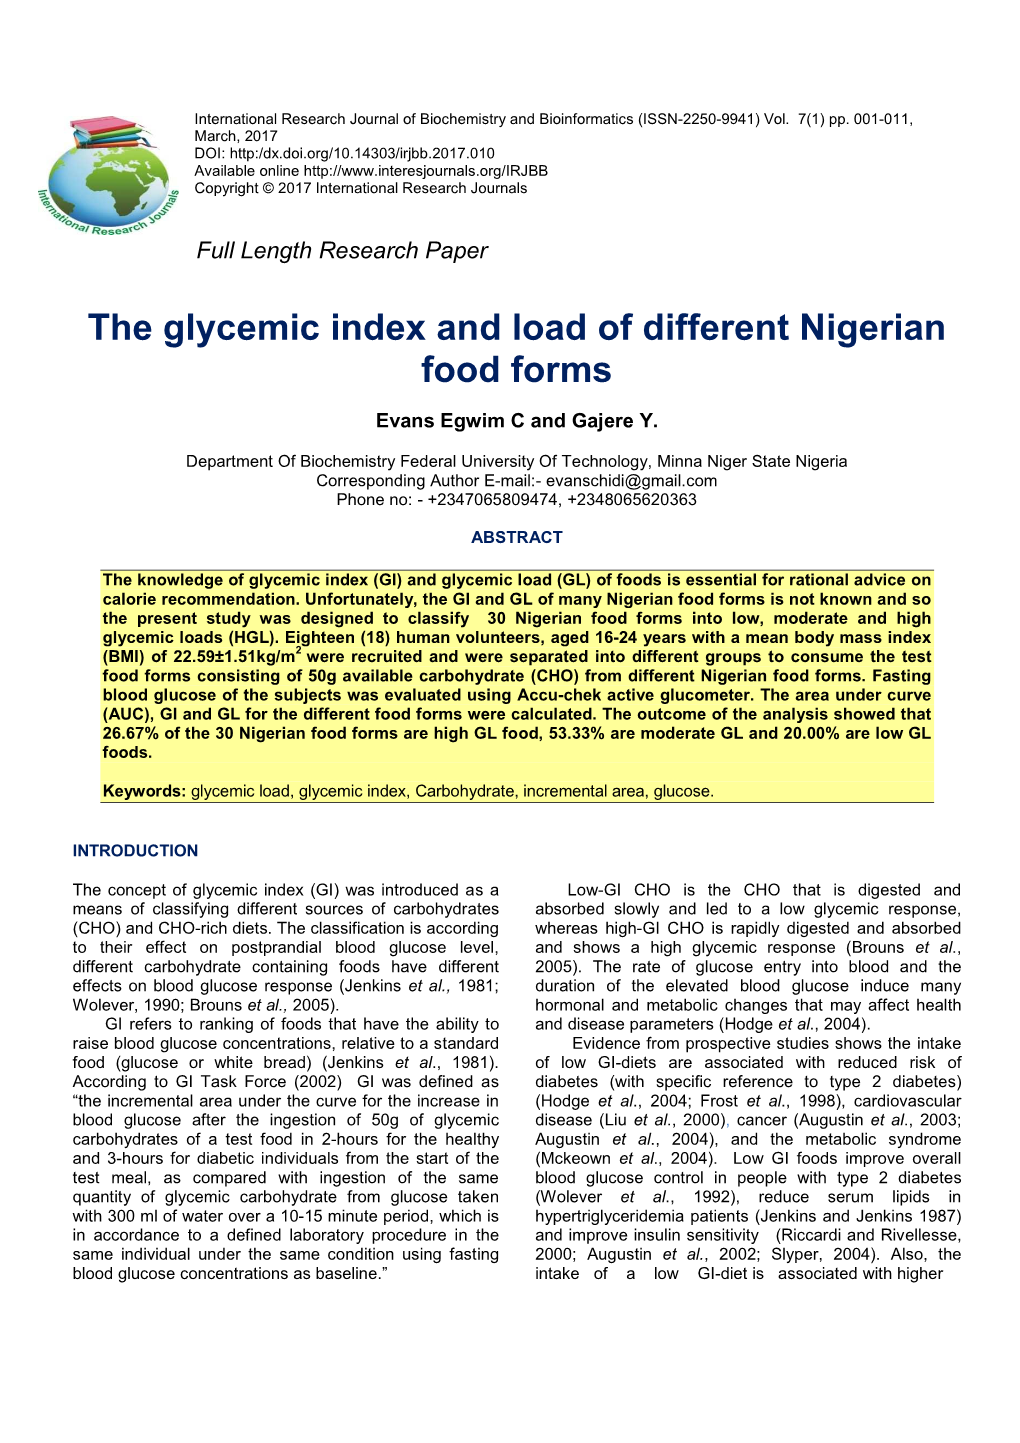 The Glycemic Index and Load of Different Nigerian Food Forms